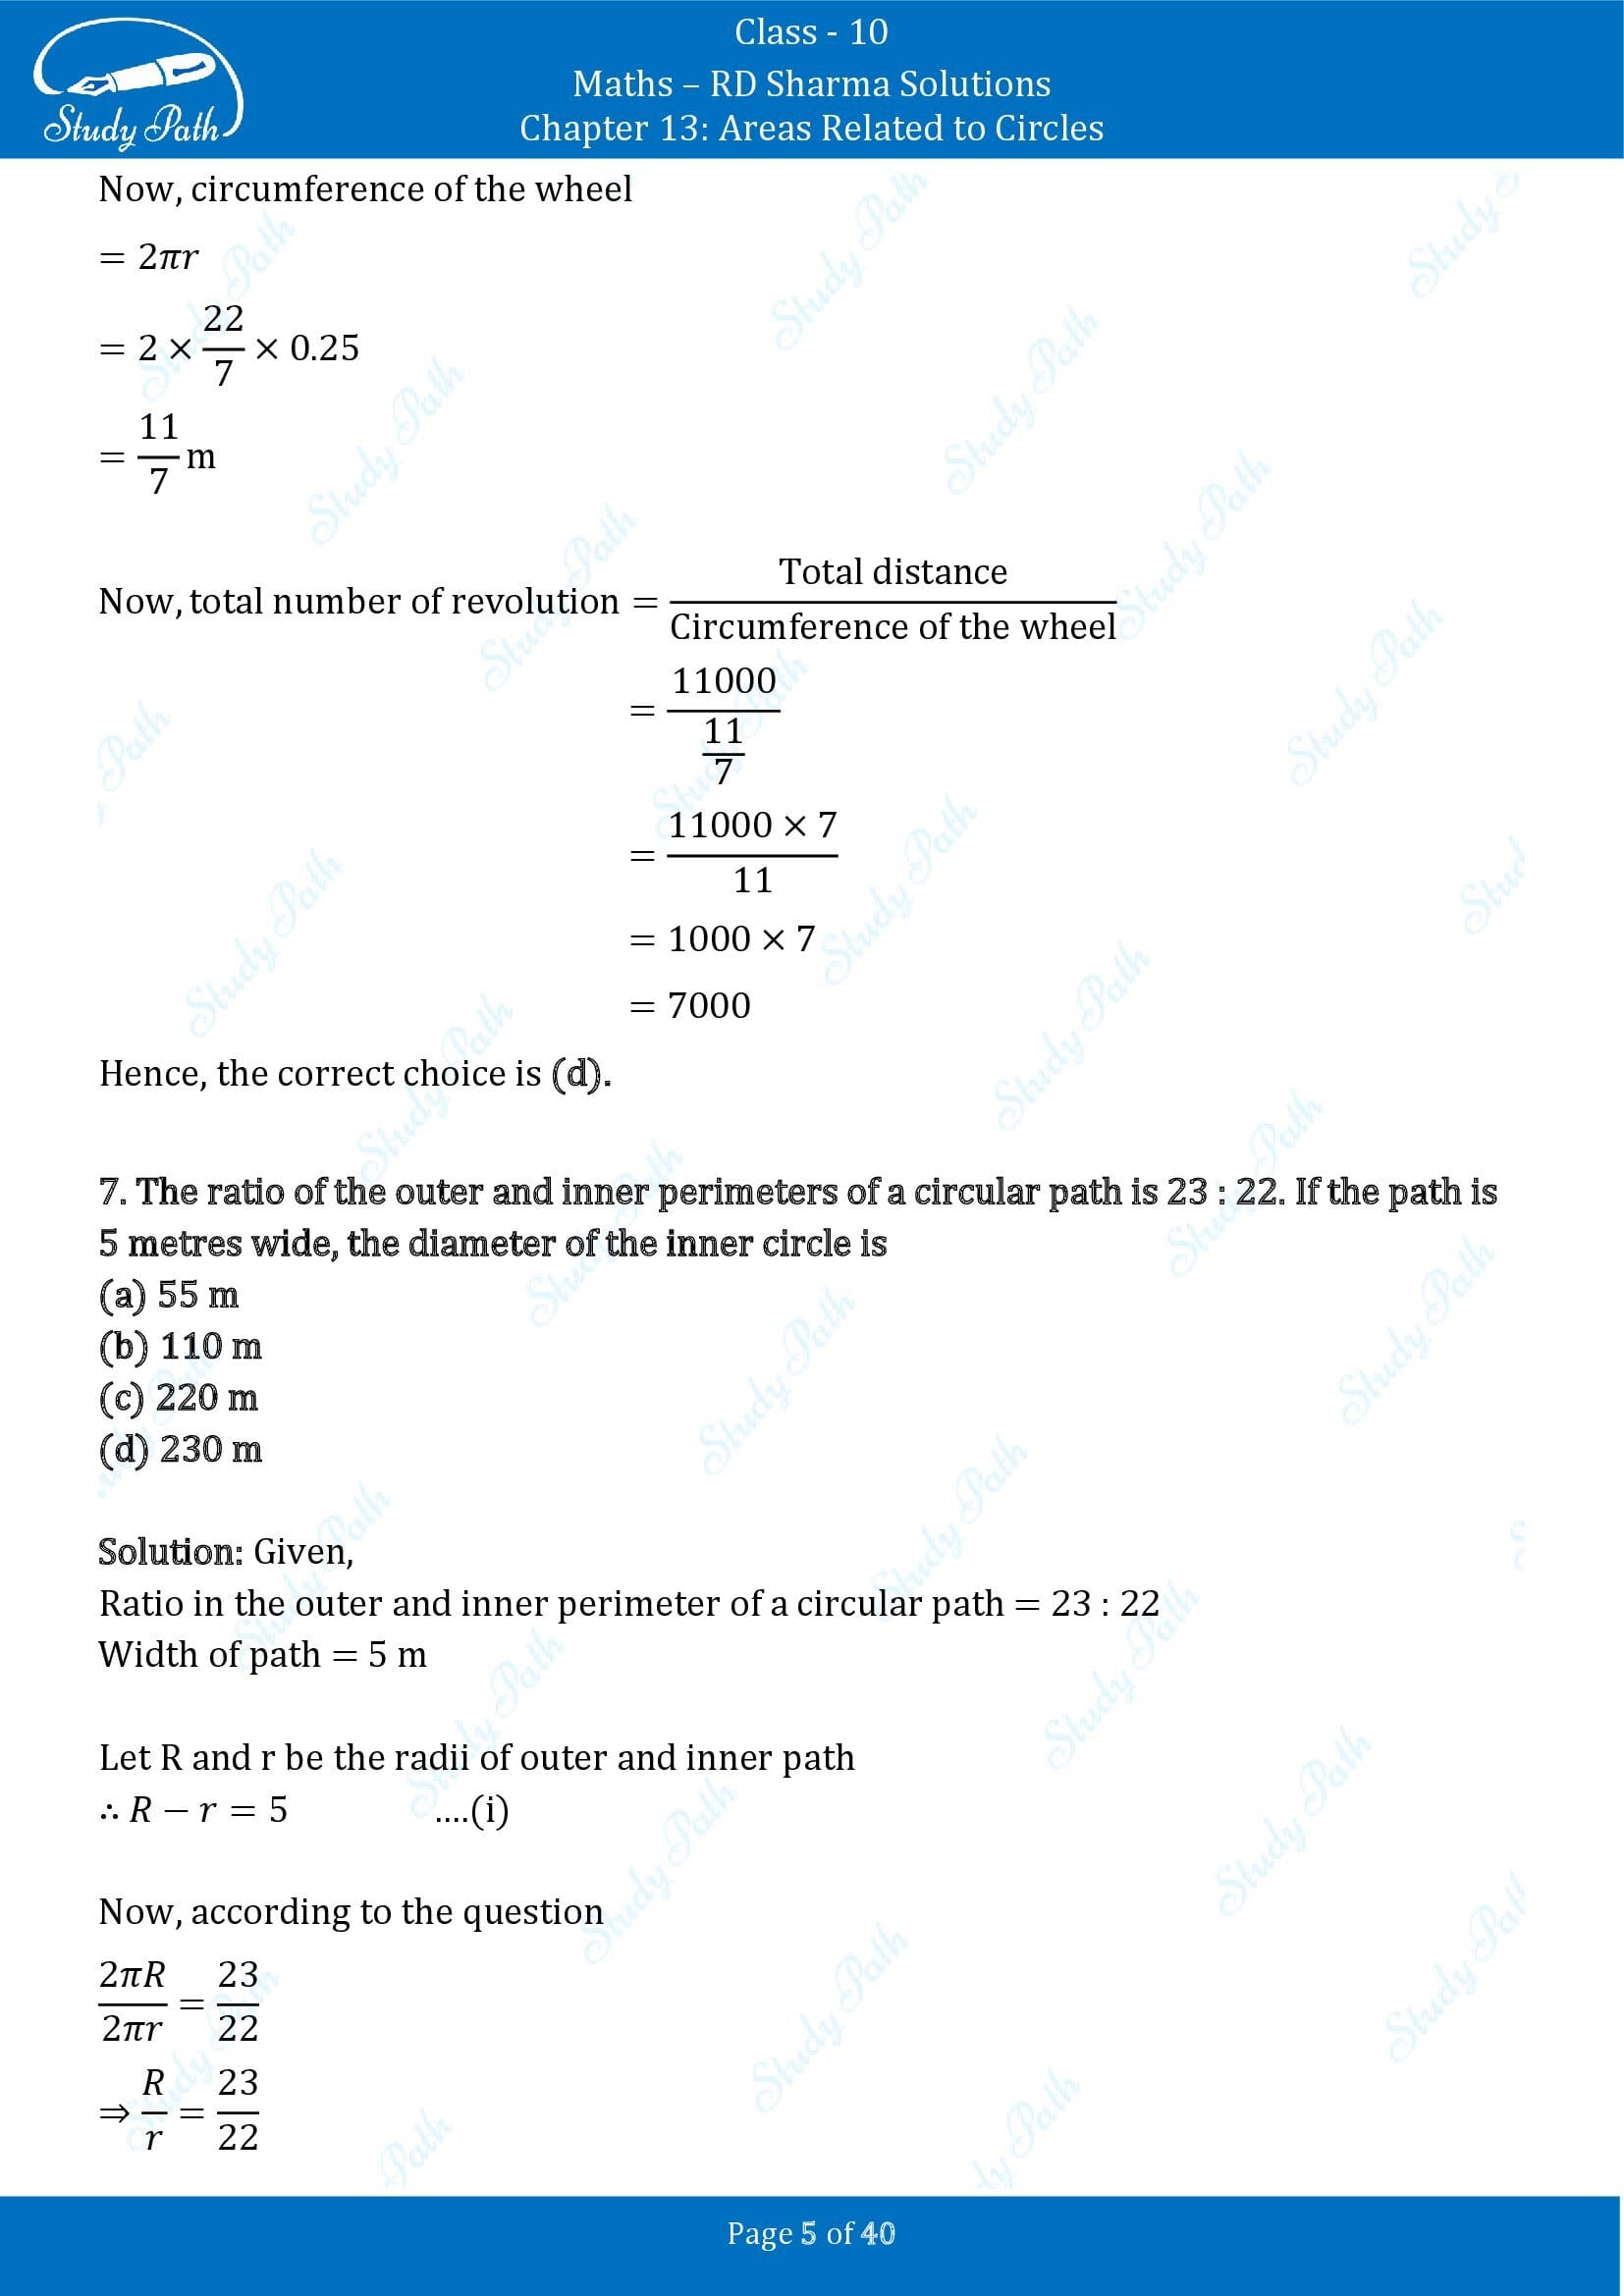 RD Sharma Solutions Class 10 Chapter 13 Areas Related to Circles Multiple Choice Question MCQs 00005